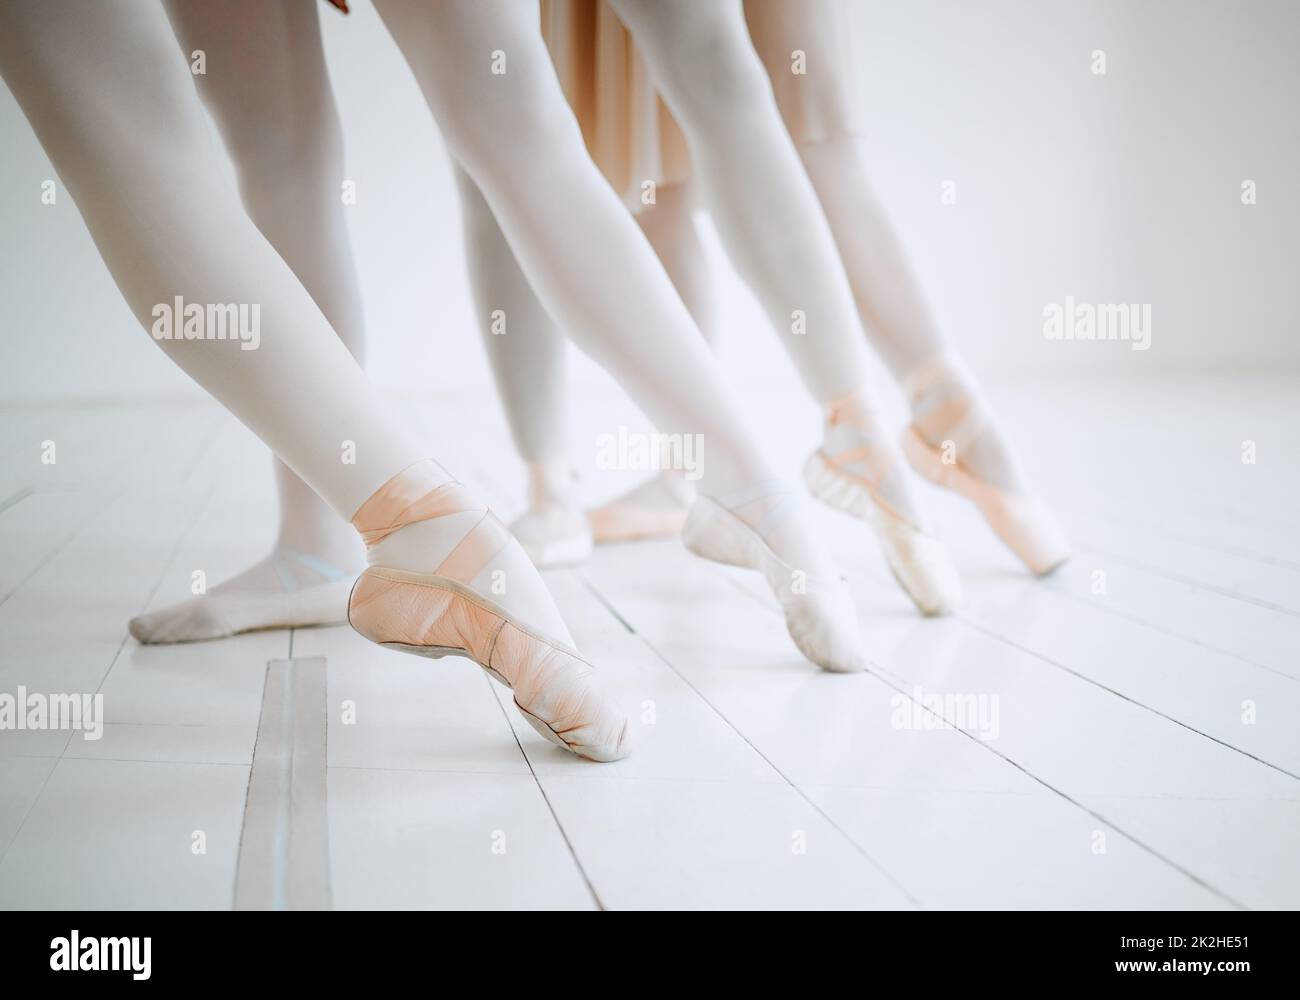 Dance with your heart and your feet will follow. Shot of a group of ballerinas with toes pointed. Stock Photo